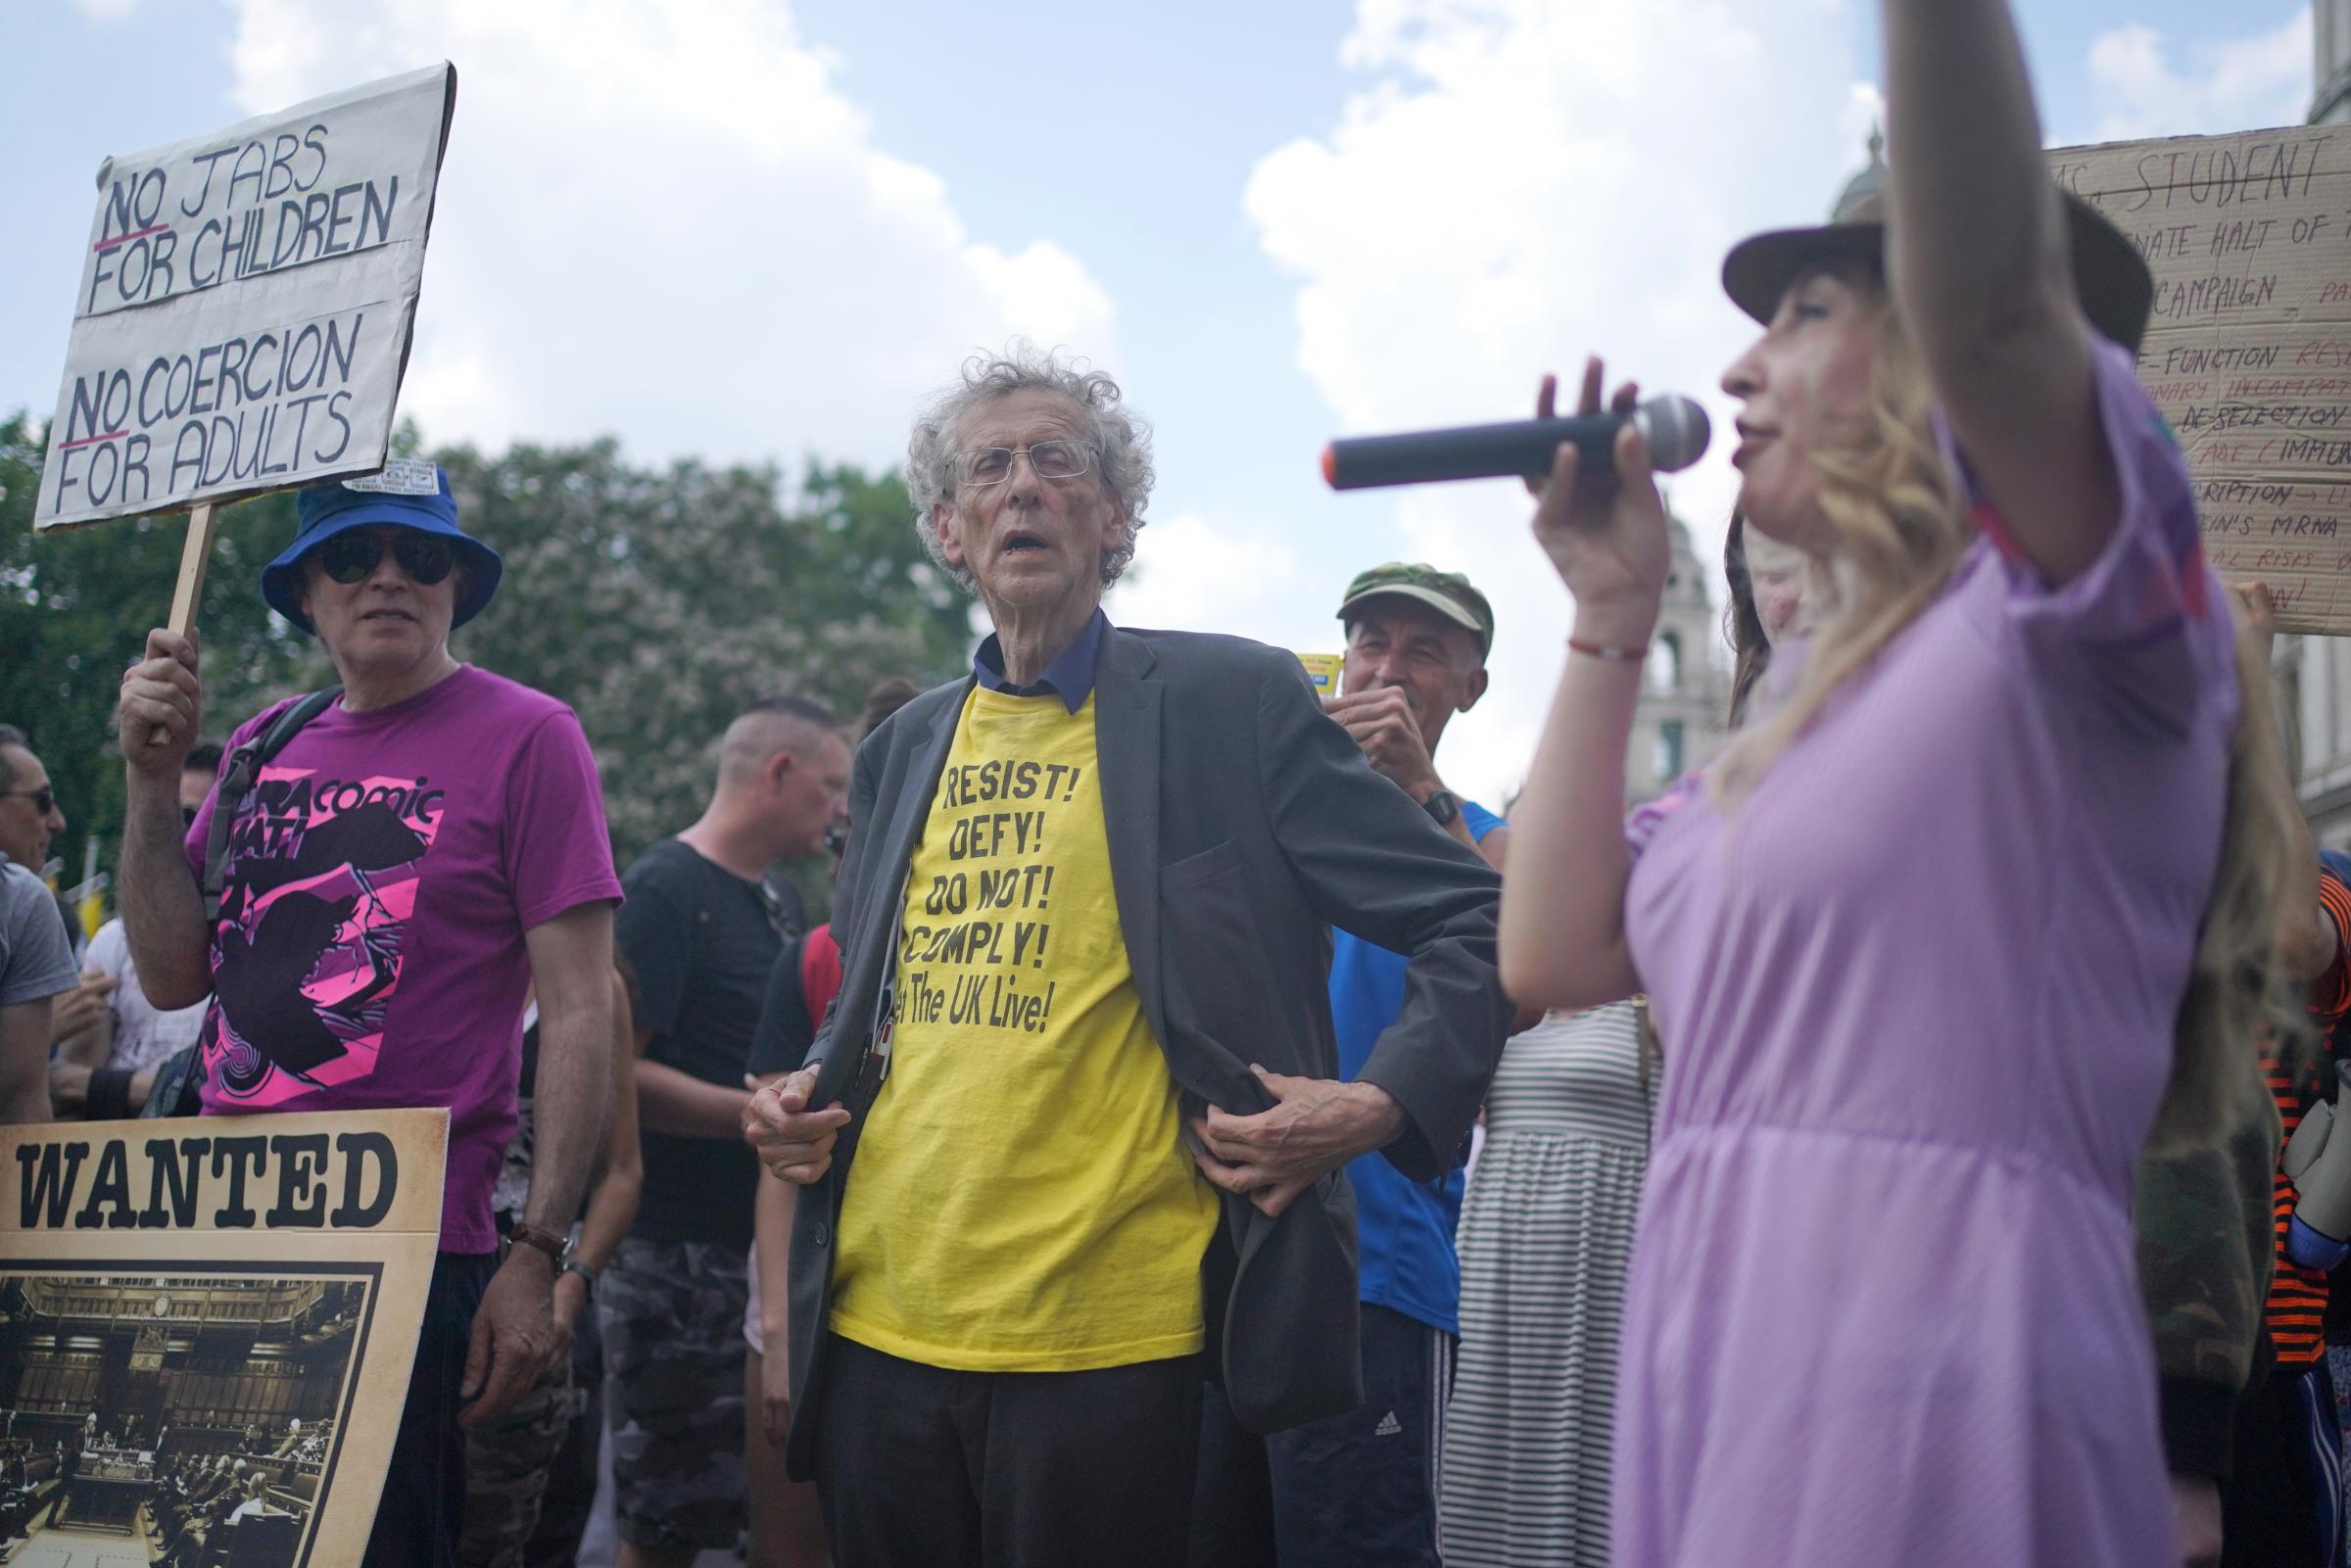 Piers Corbyn at an anti-vaccination protest in July (Photo: PA)